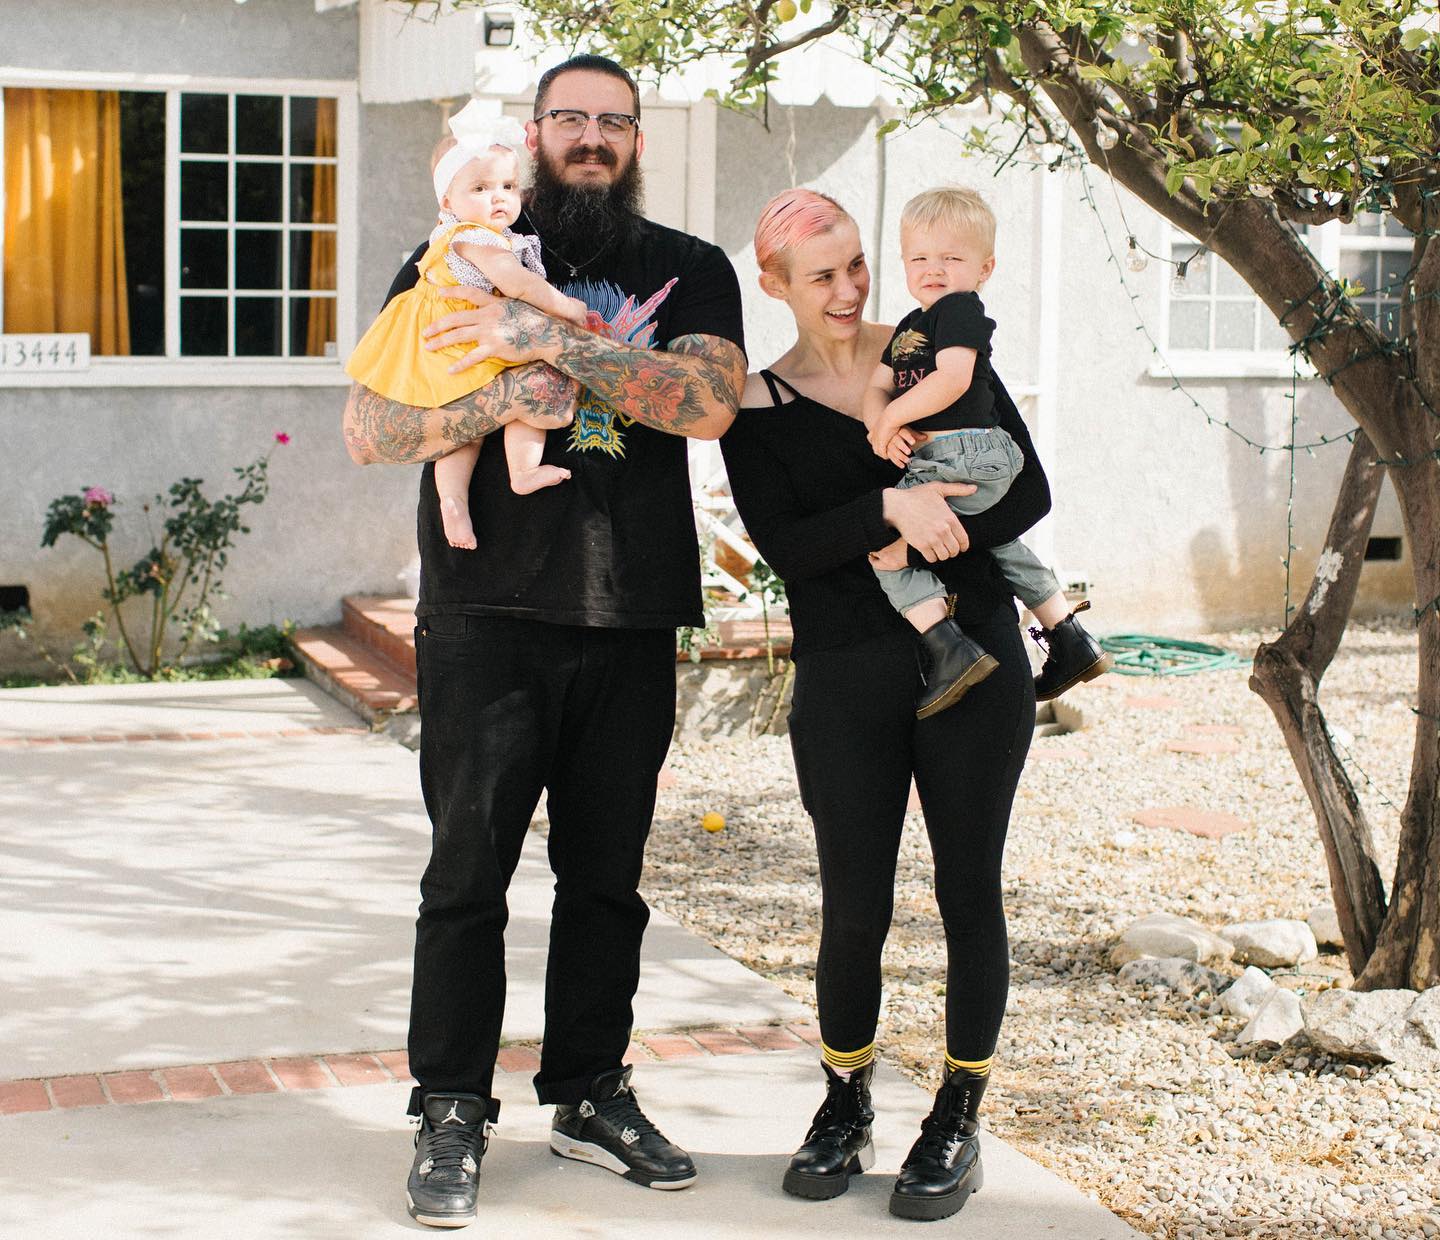 Brody King With His Wife And Children